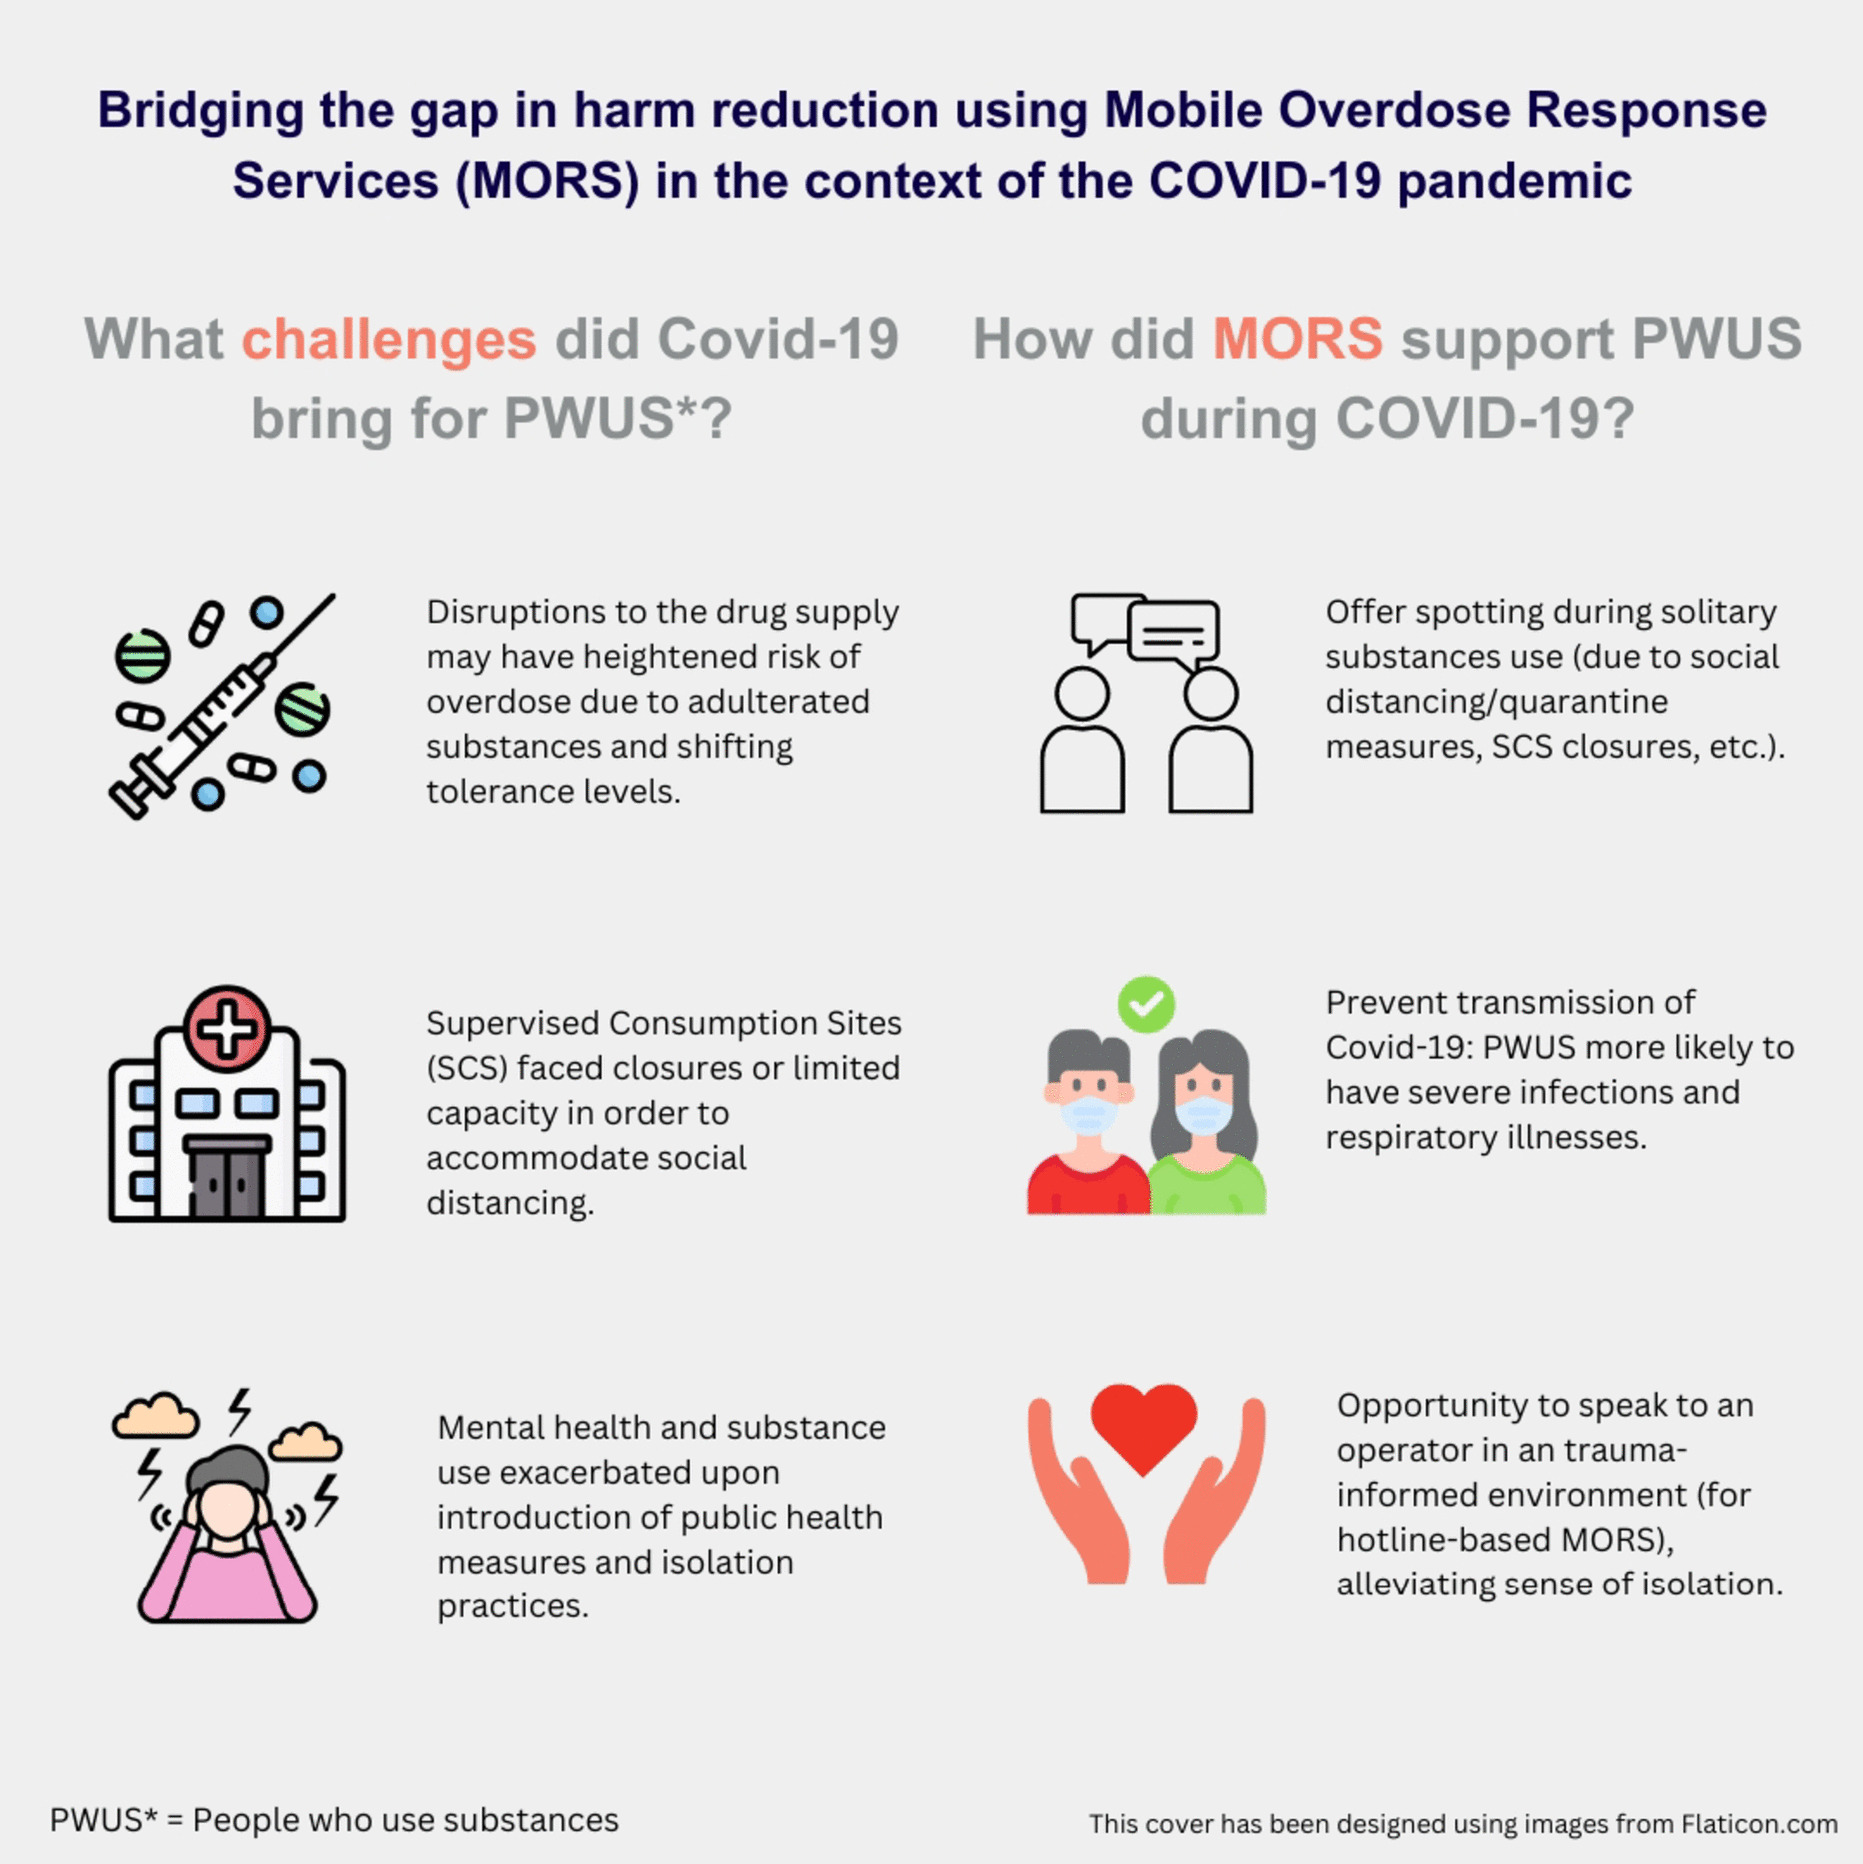 Bridging the Gap in Harm Reduction Using Mobile Overdose Response Services (MORS) in the Context of the COVID-19 Pandemic: A Qualitative Study